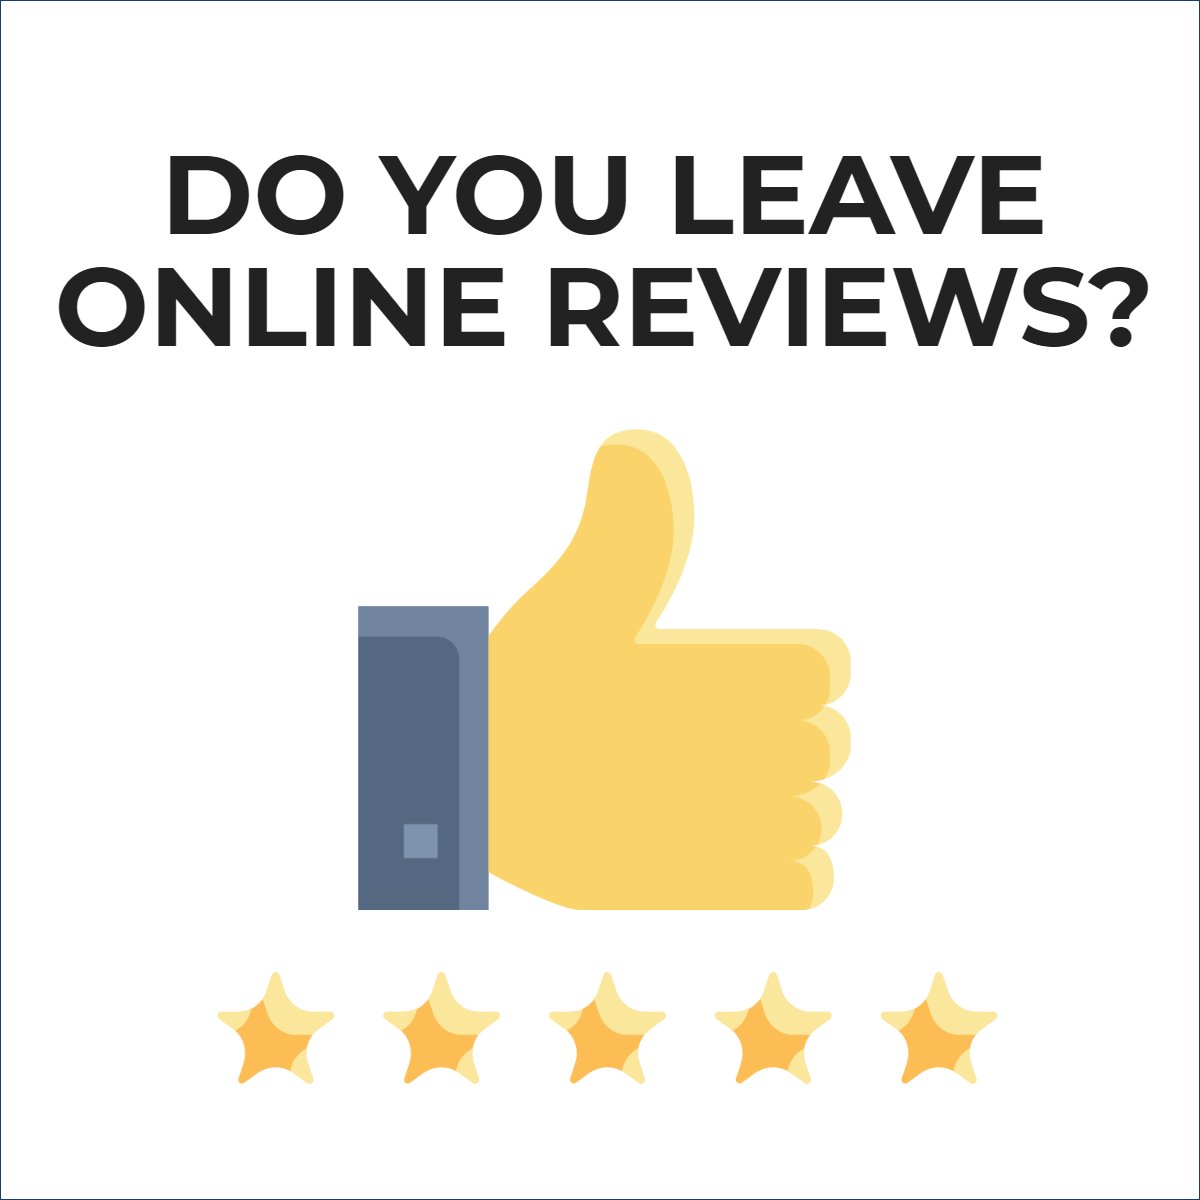 Did you know that 90% of consumers read online reviews before visiting a business? 😉

#onlinereviews #onlinereviewsmatter #realestate #realestatecoach #digitalmarketing #reviews #reputation 
 #thepropertyexchangegroup #InvestingInRealEstate #1031Exchange